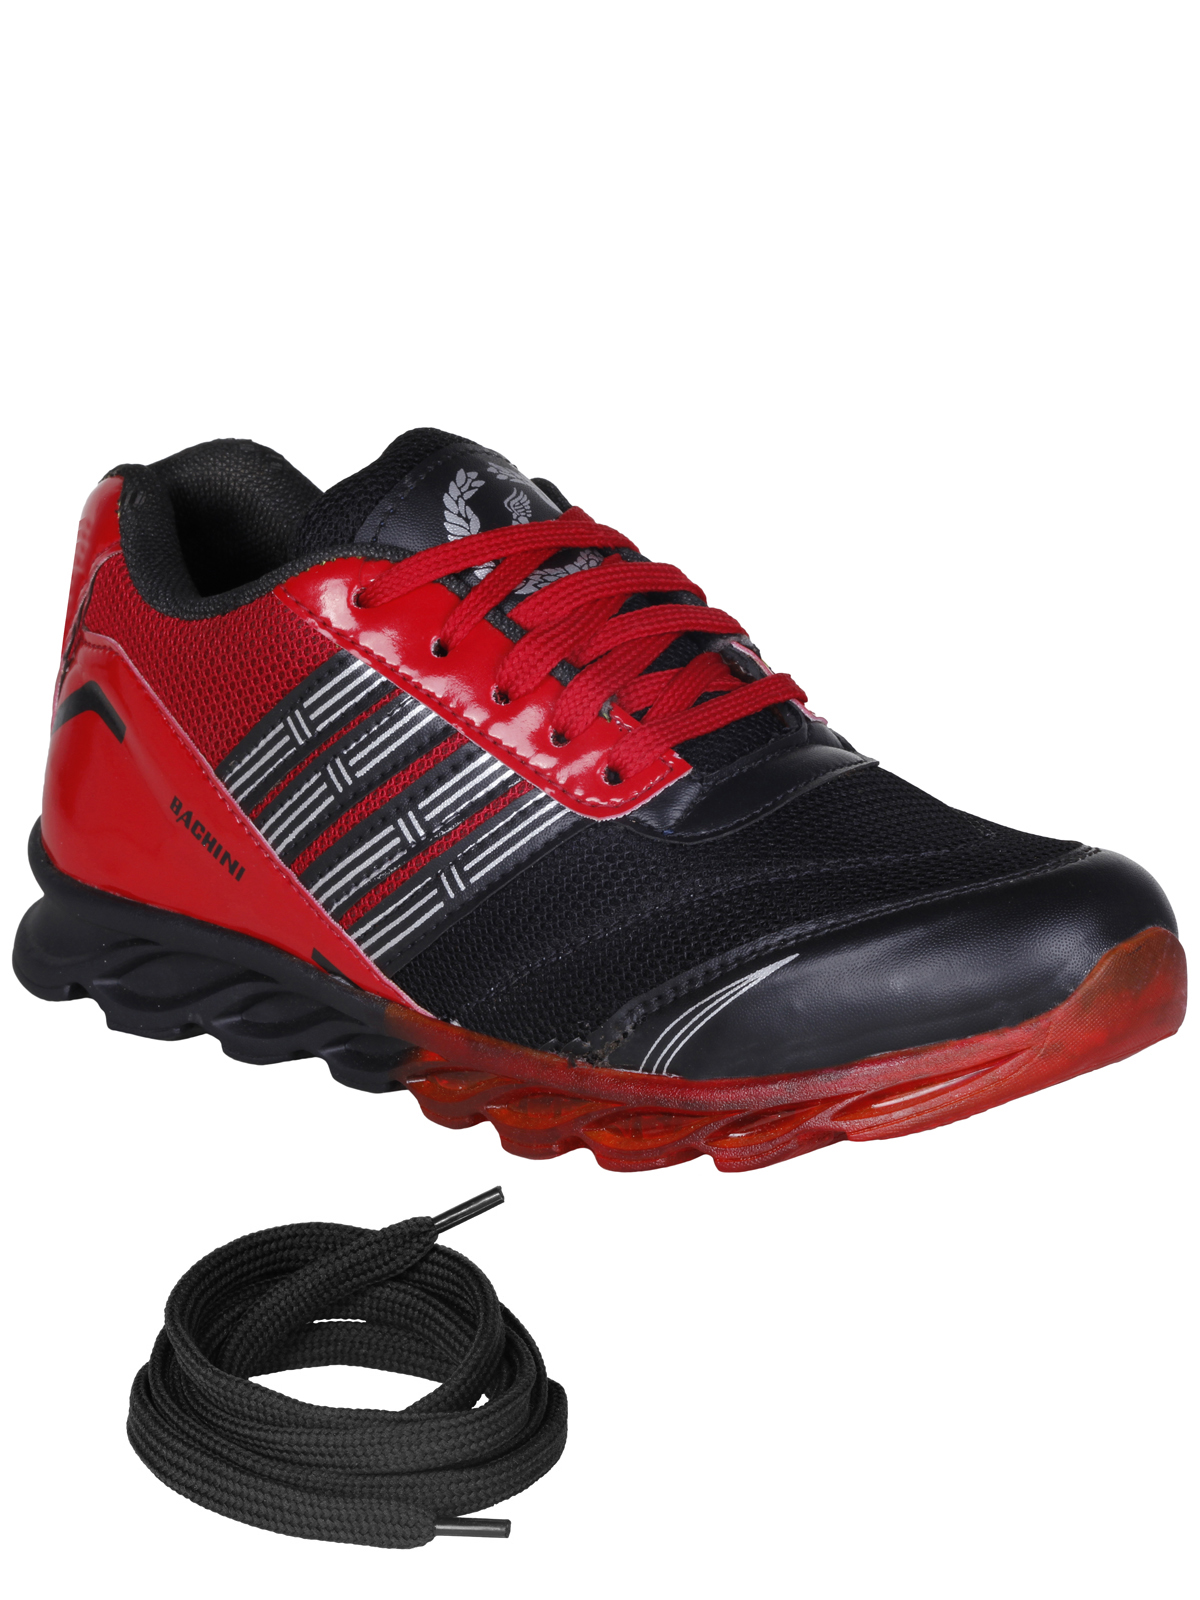 Buy Bachini MenS Red Running Shoes Online @ ₹499 from ShopClues